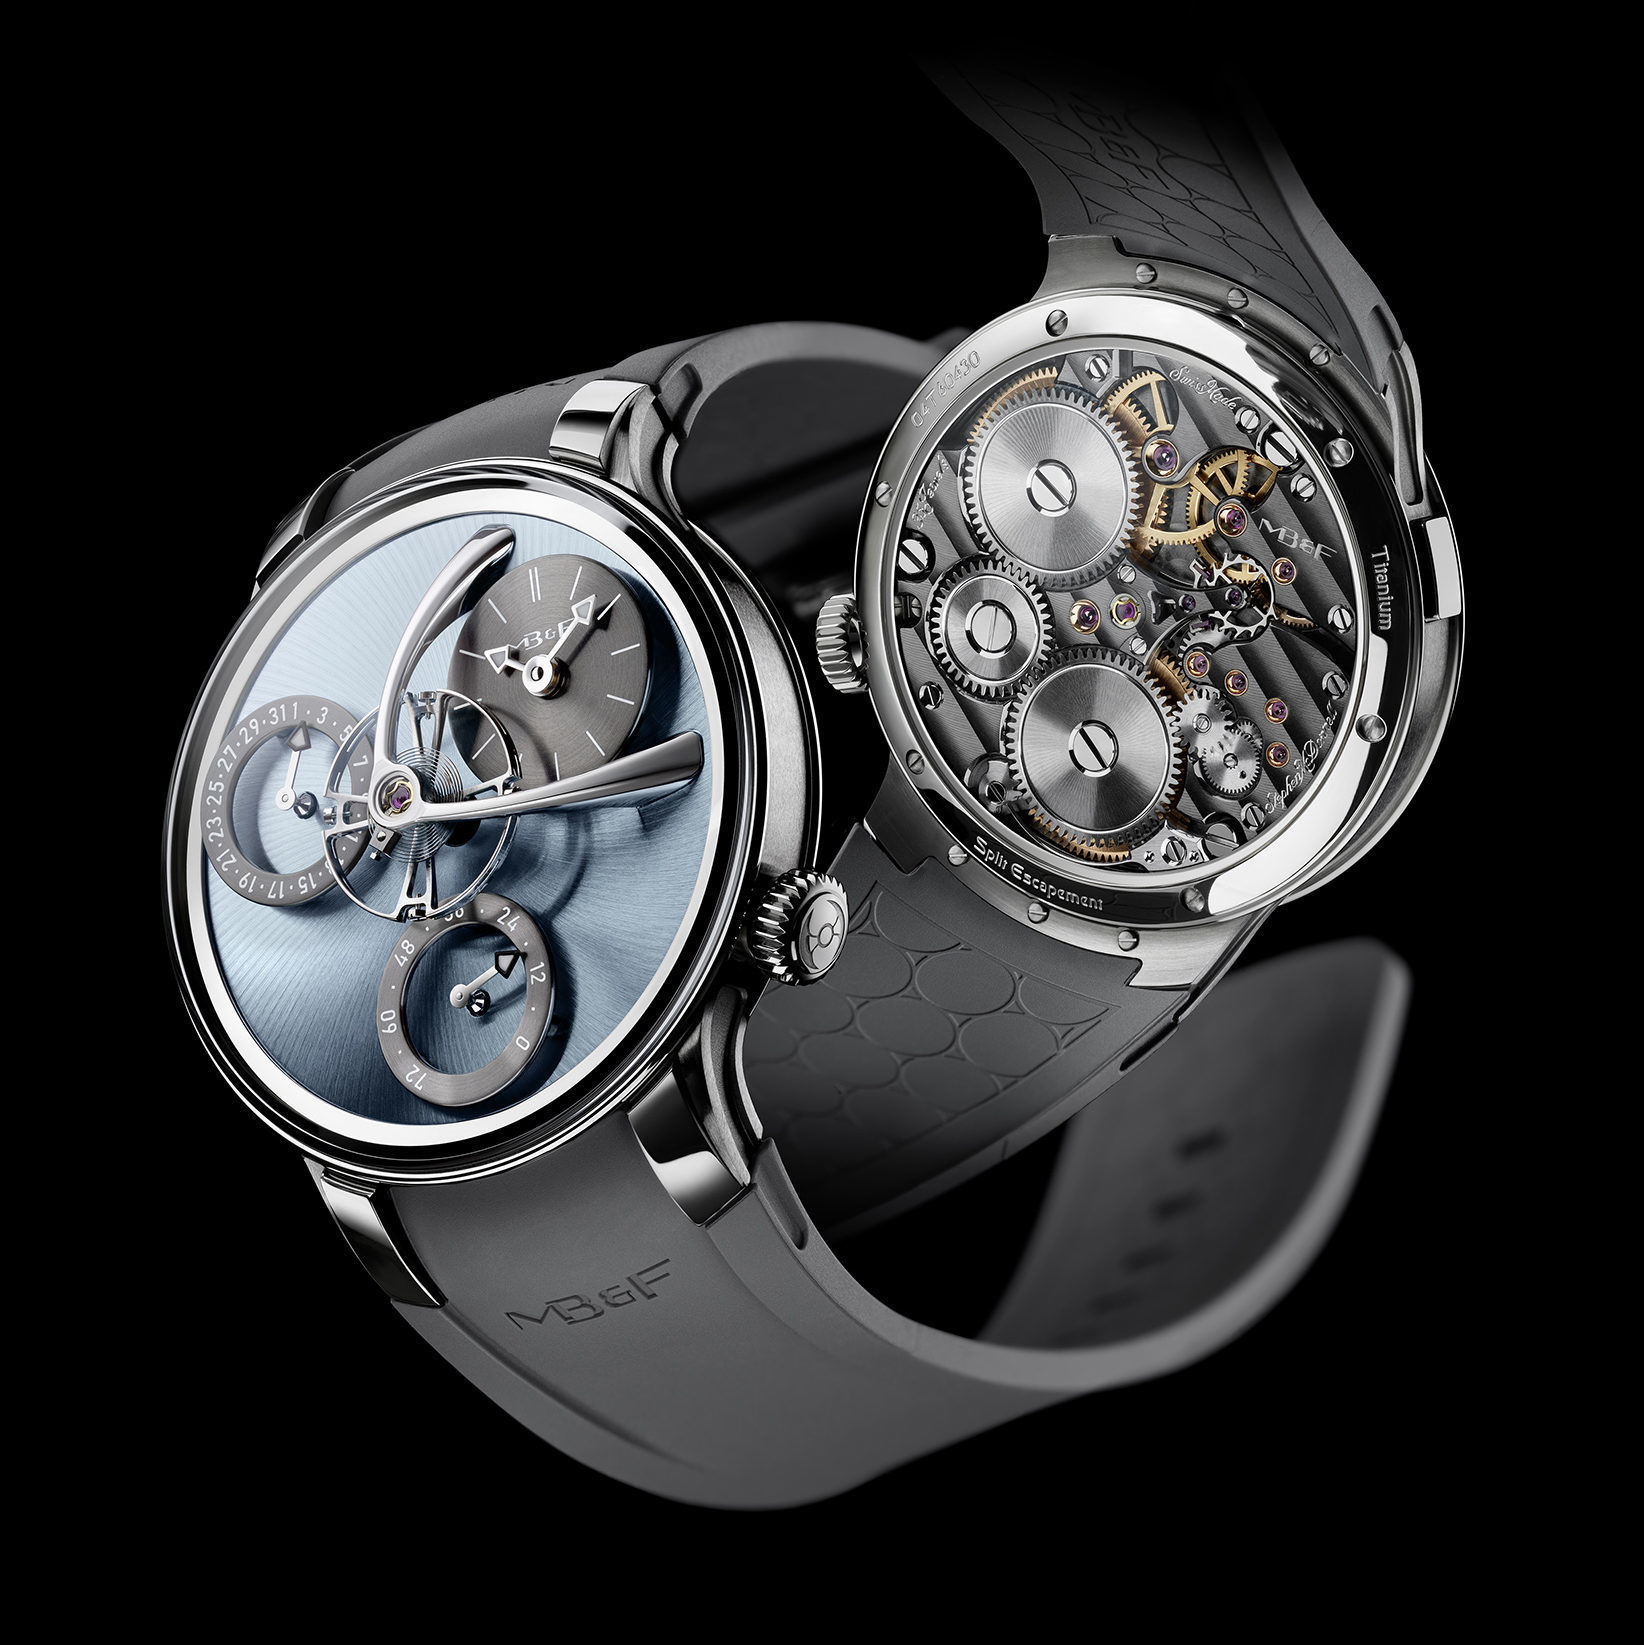 Showing at WatchTime New York 2022: MB&F Legacy Machine Split Escapement EVO